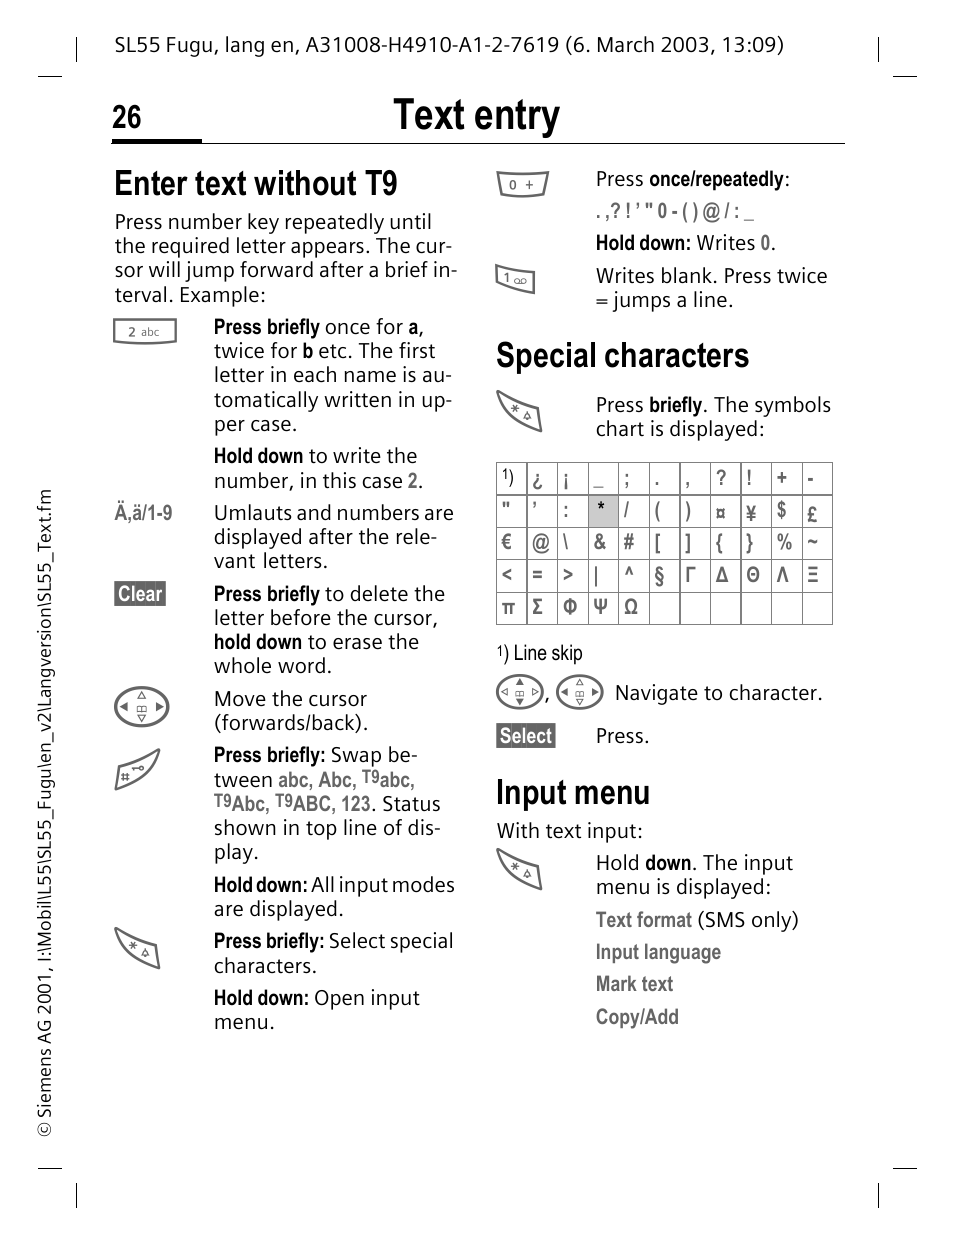 Text entry, Enter text without t9, Special characters | Siemens Gigaset  SL55 User Manual | Page 27 / 144 | Original mode